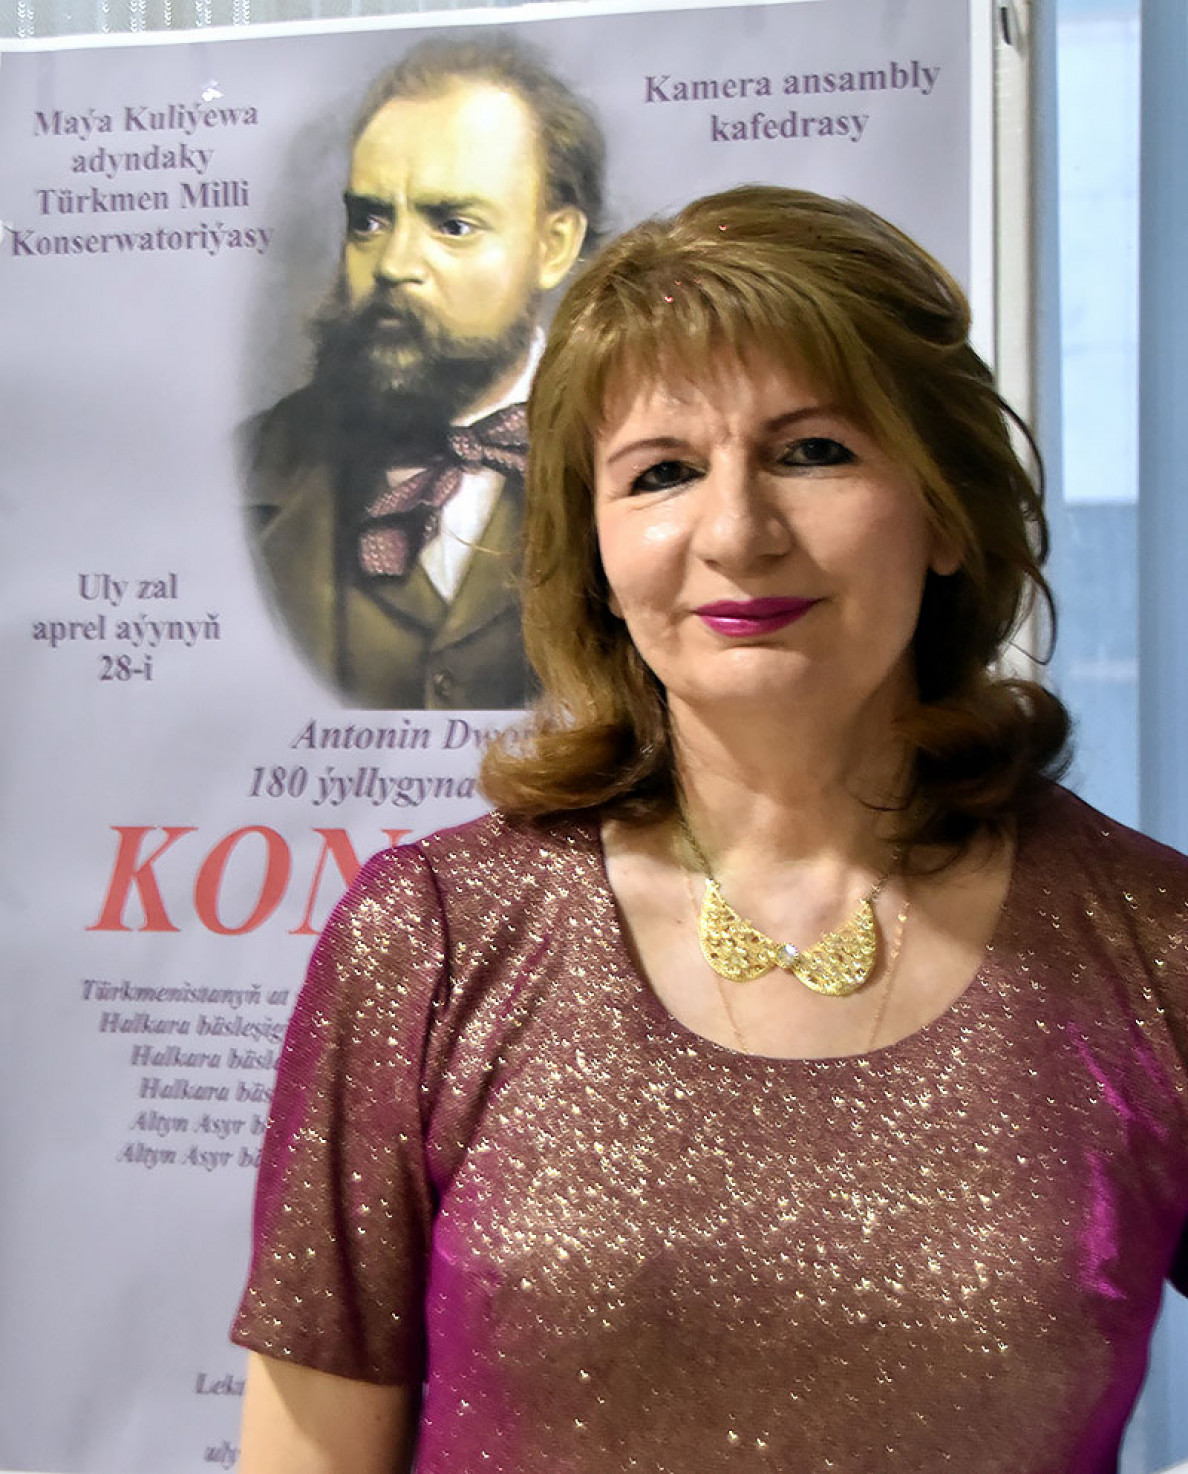 World of Feelings and Music by Antonín Dvořák: Czech Composer’s Works Performed in Ashgabat